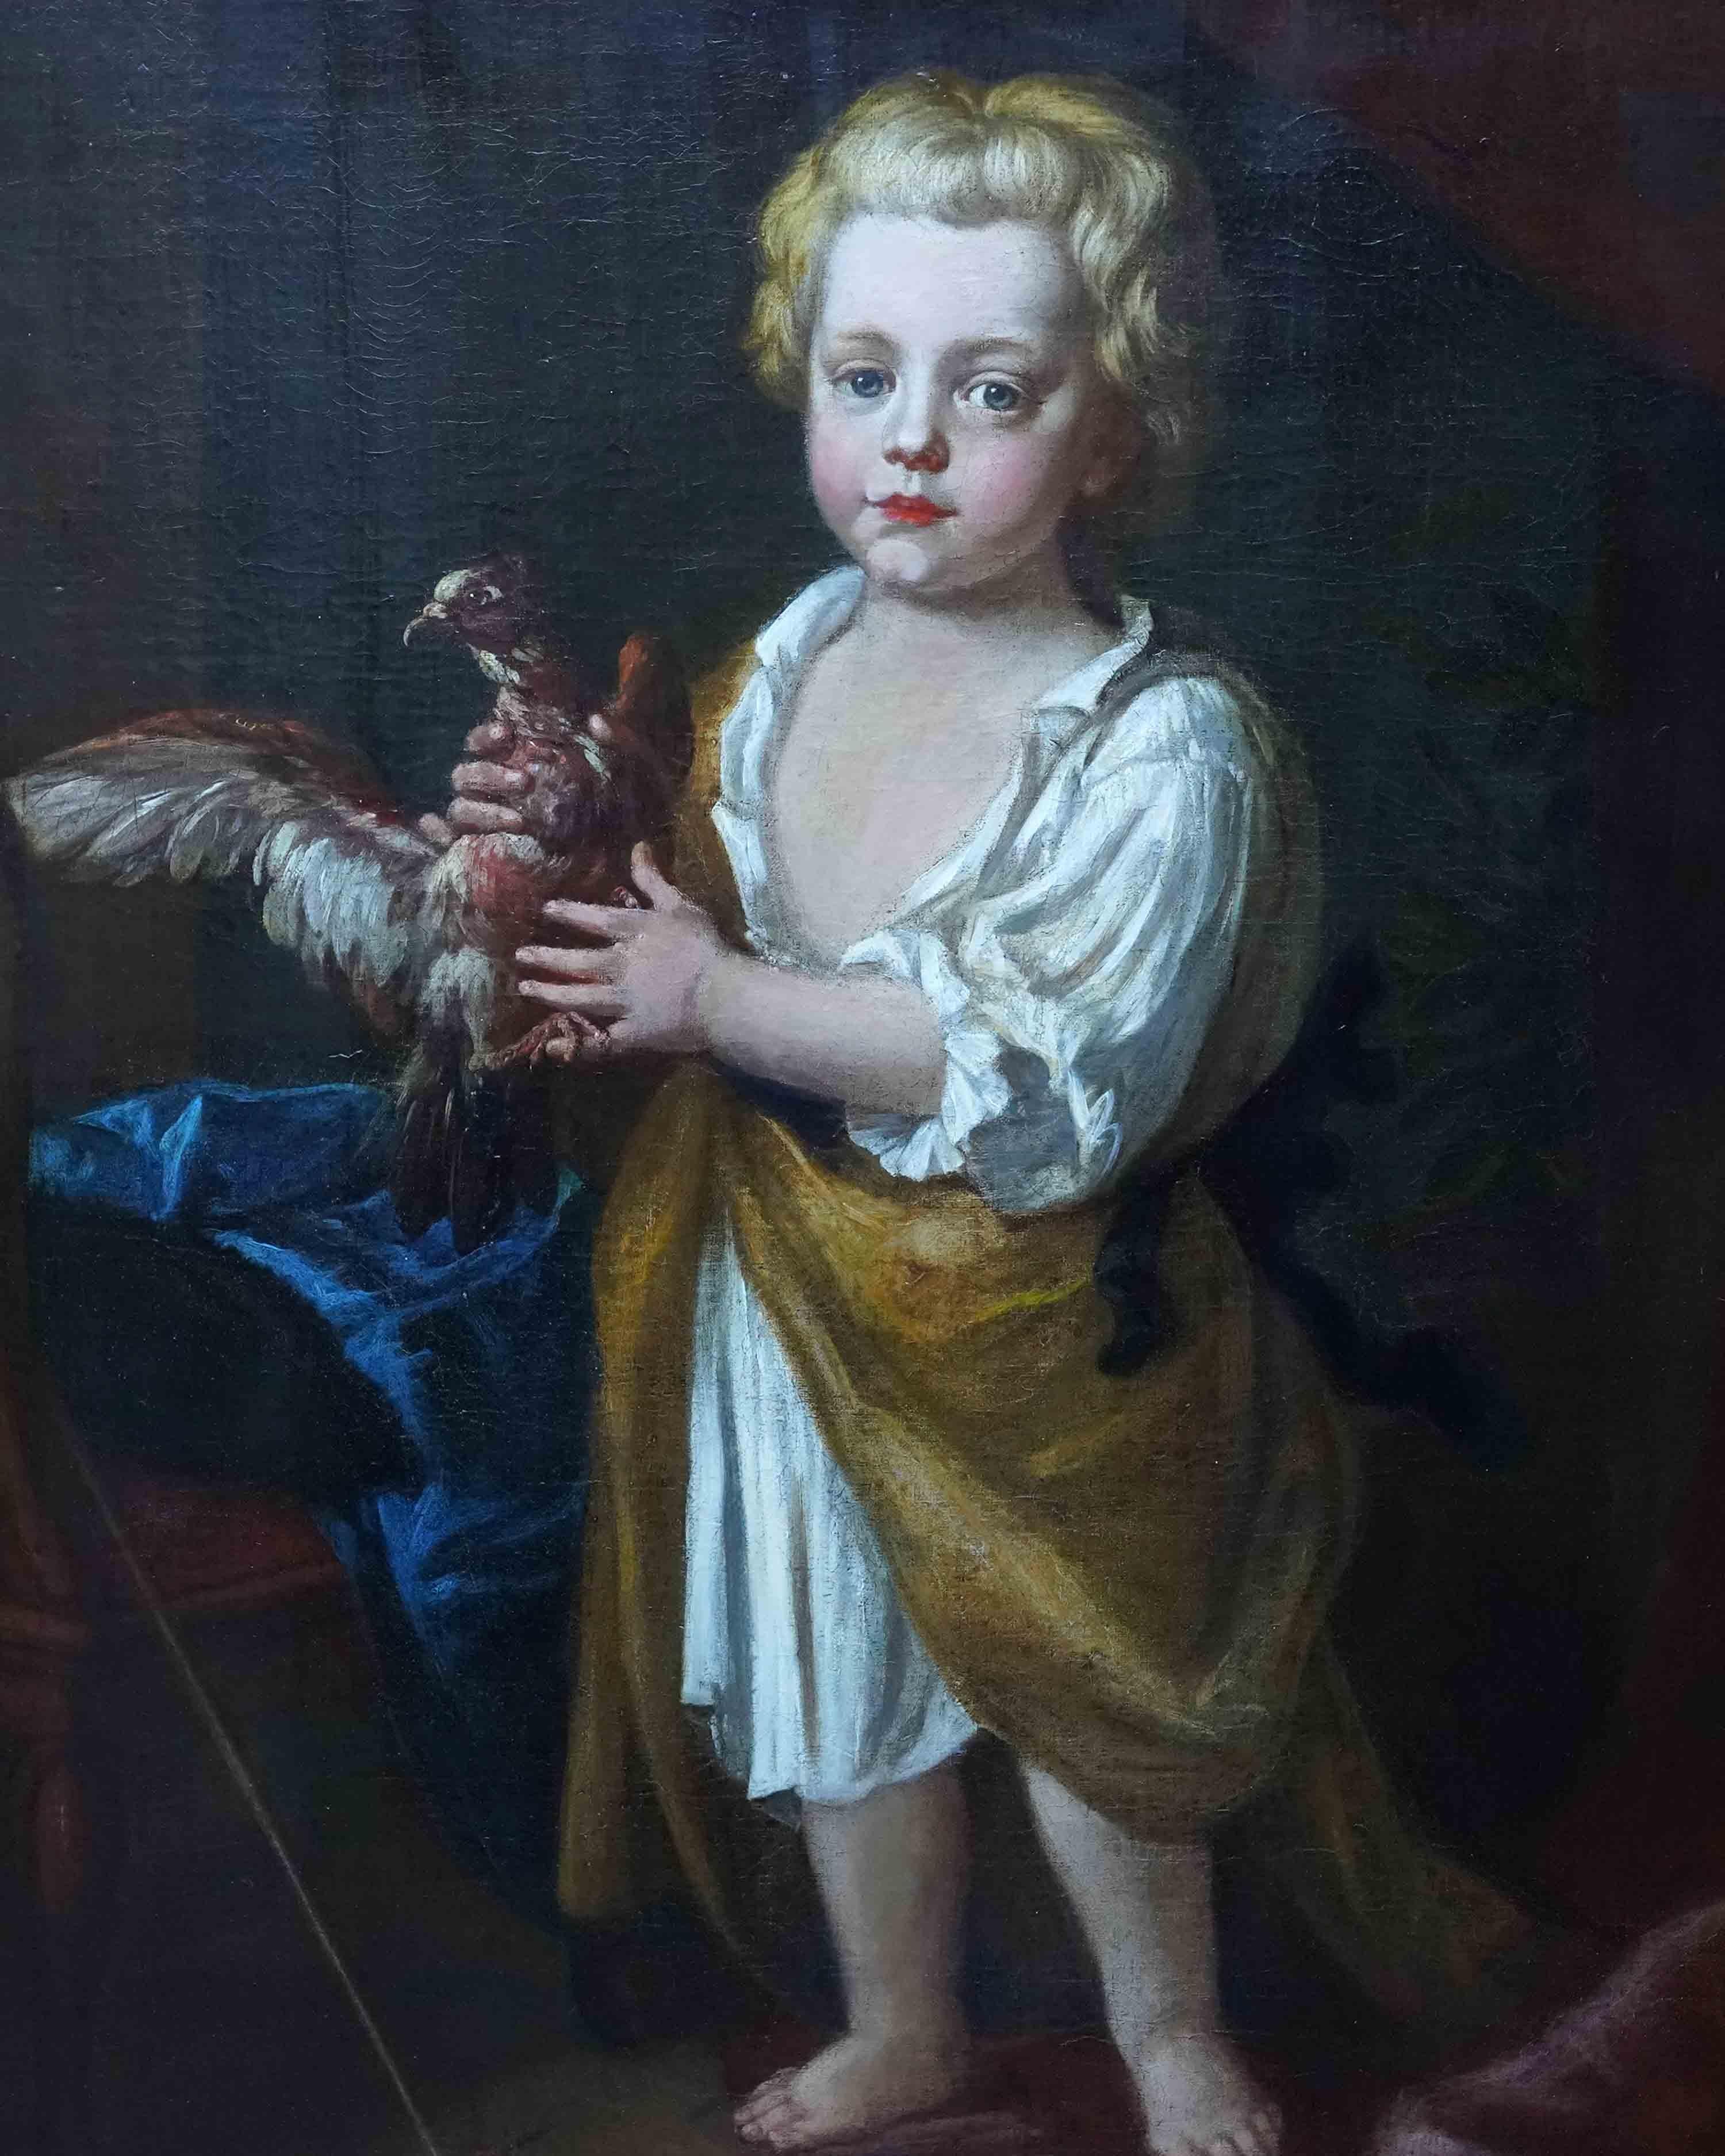 Portrait of a Boy with Bird - British 17th century art Old Master oil painting - Painting by Godfrey Kneller